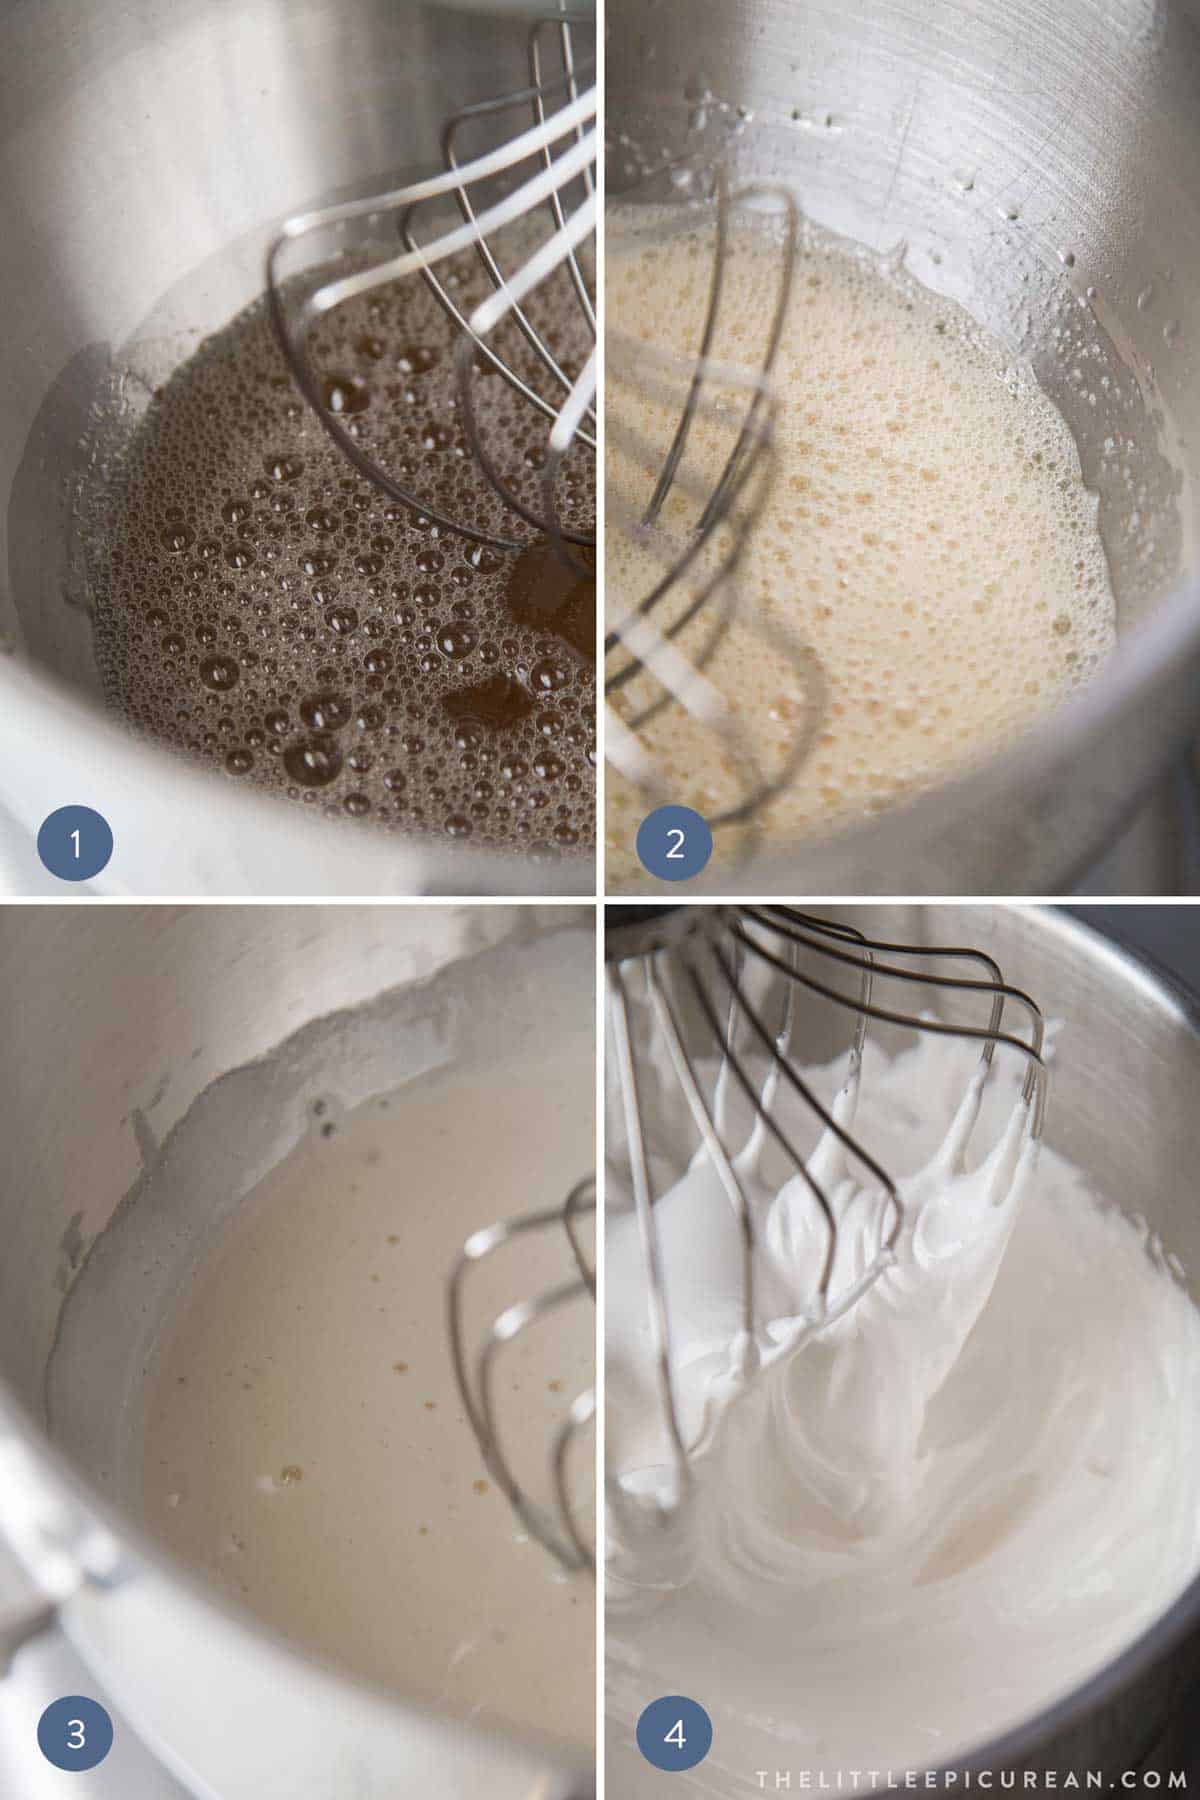 four stages of whipping sugar syrup to make homemade marshmallows.